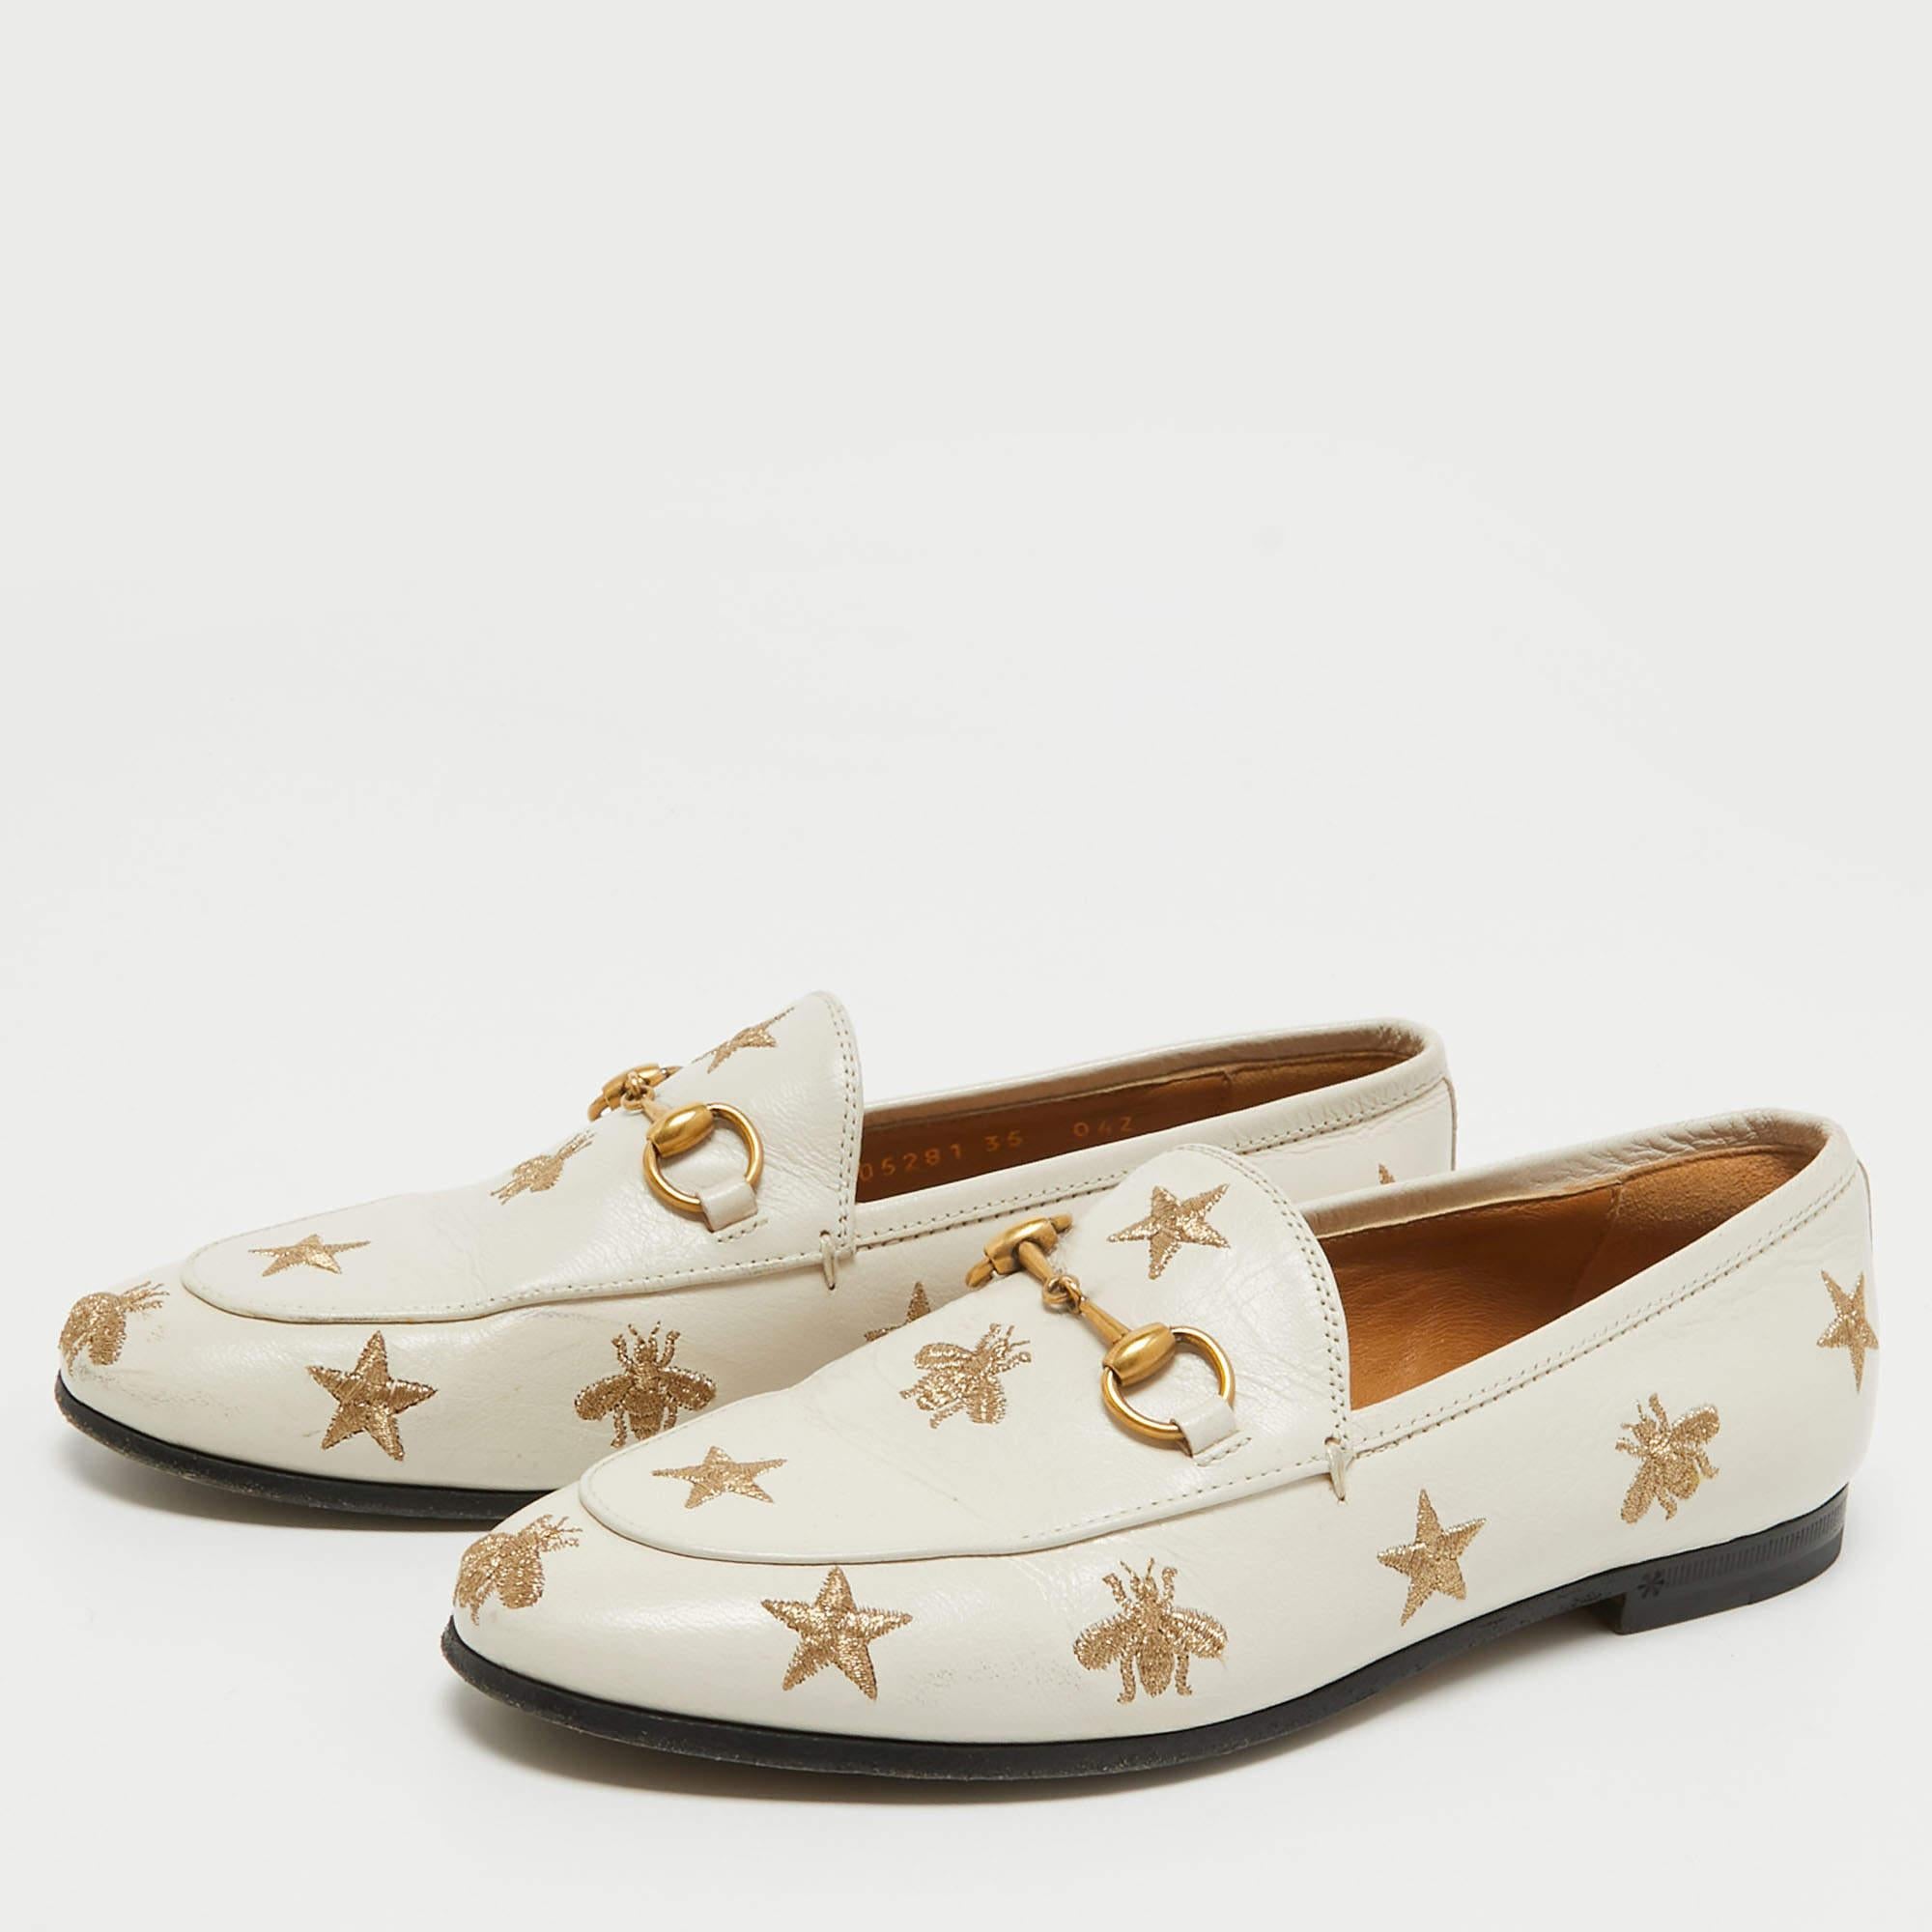 Gucci Cream Leather Jordaan Embroidered Bee Horsebit Slip On Loafers Size 35 For Sale 4